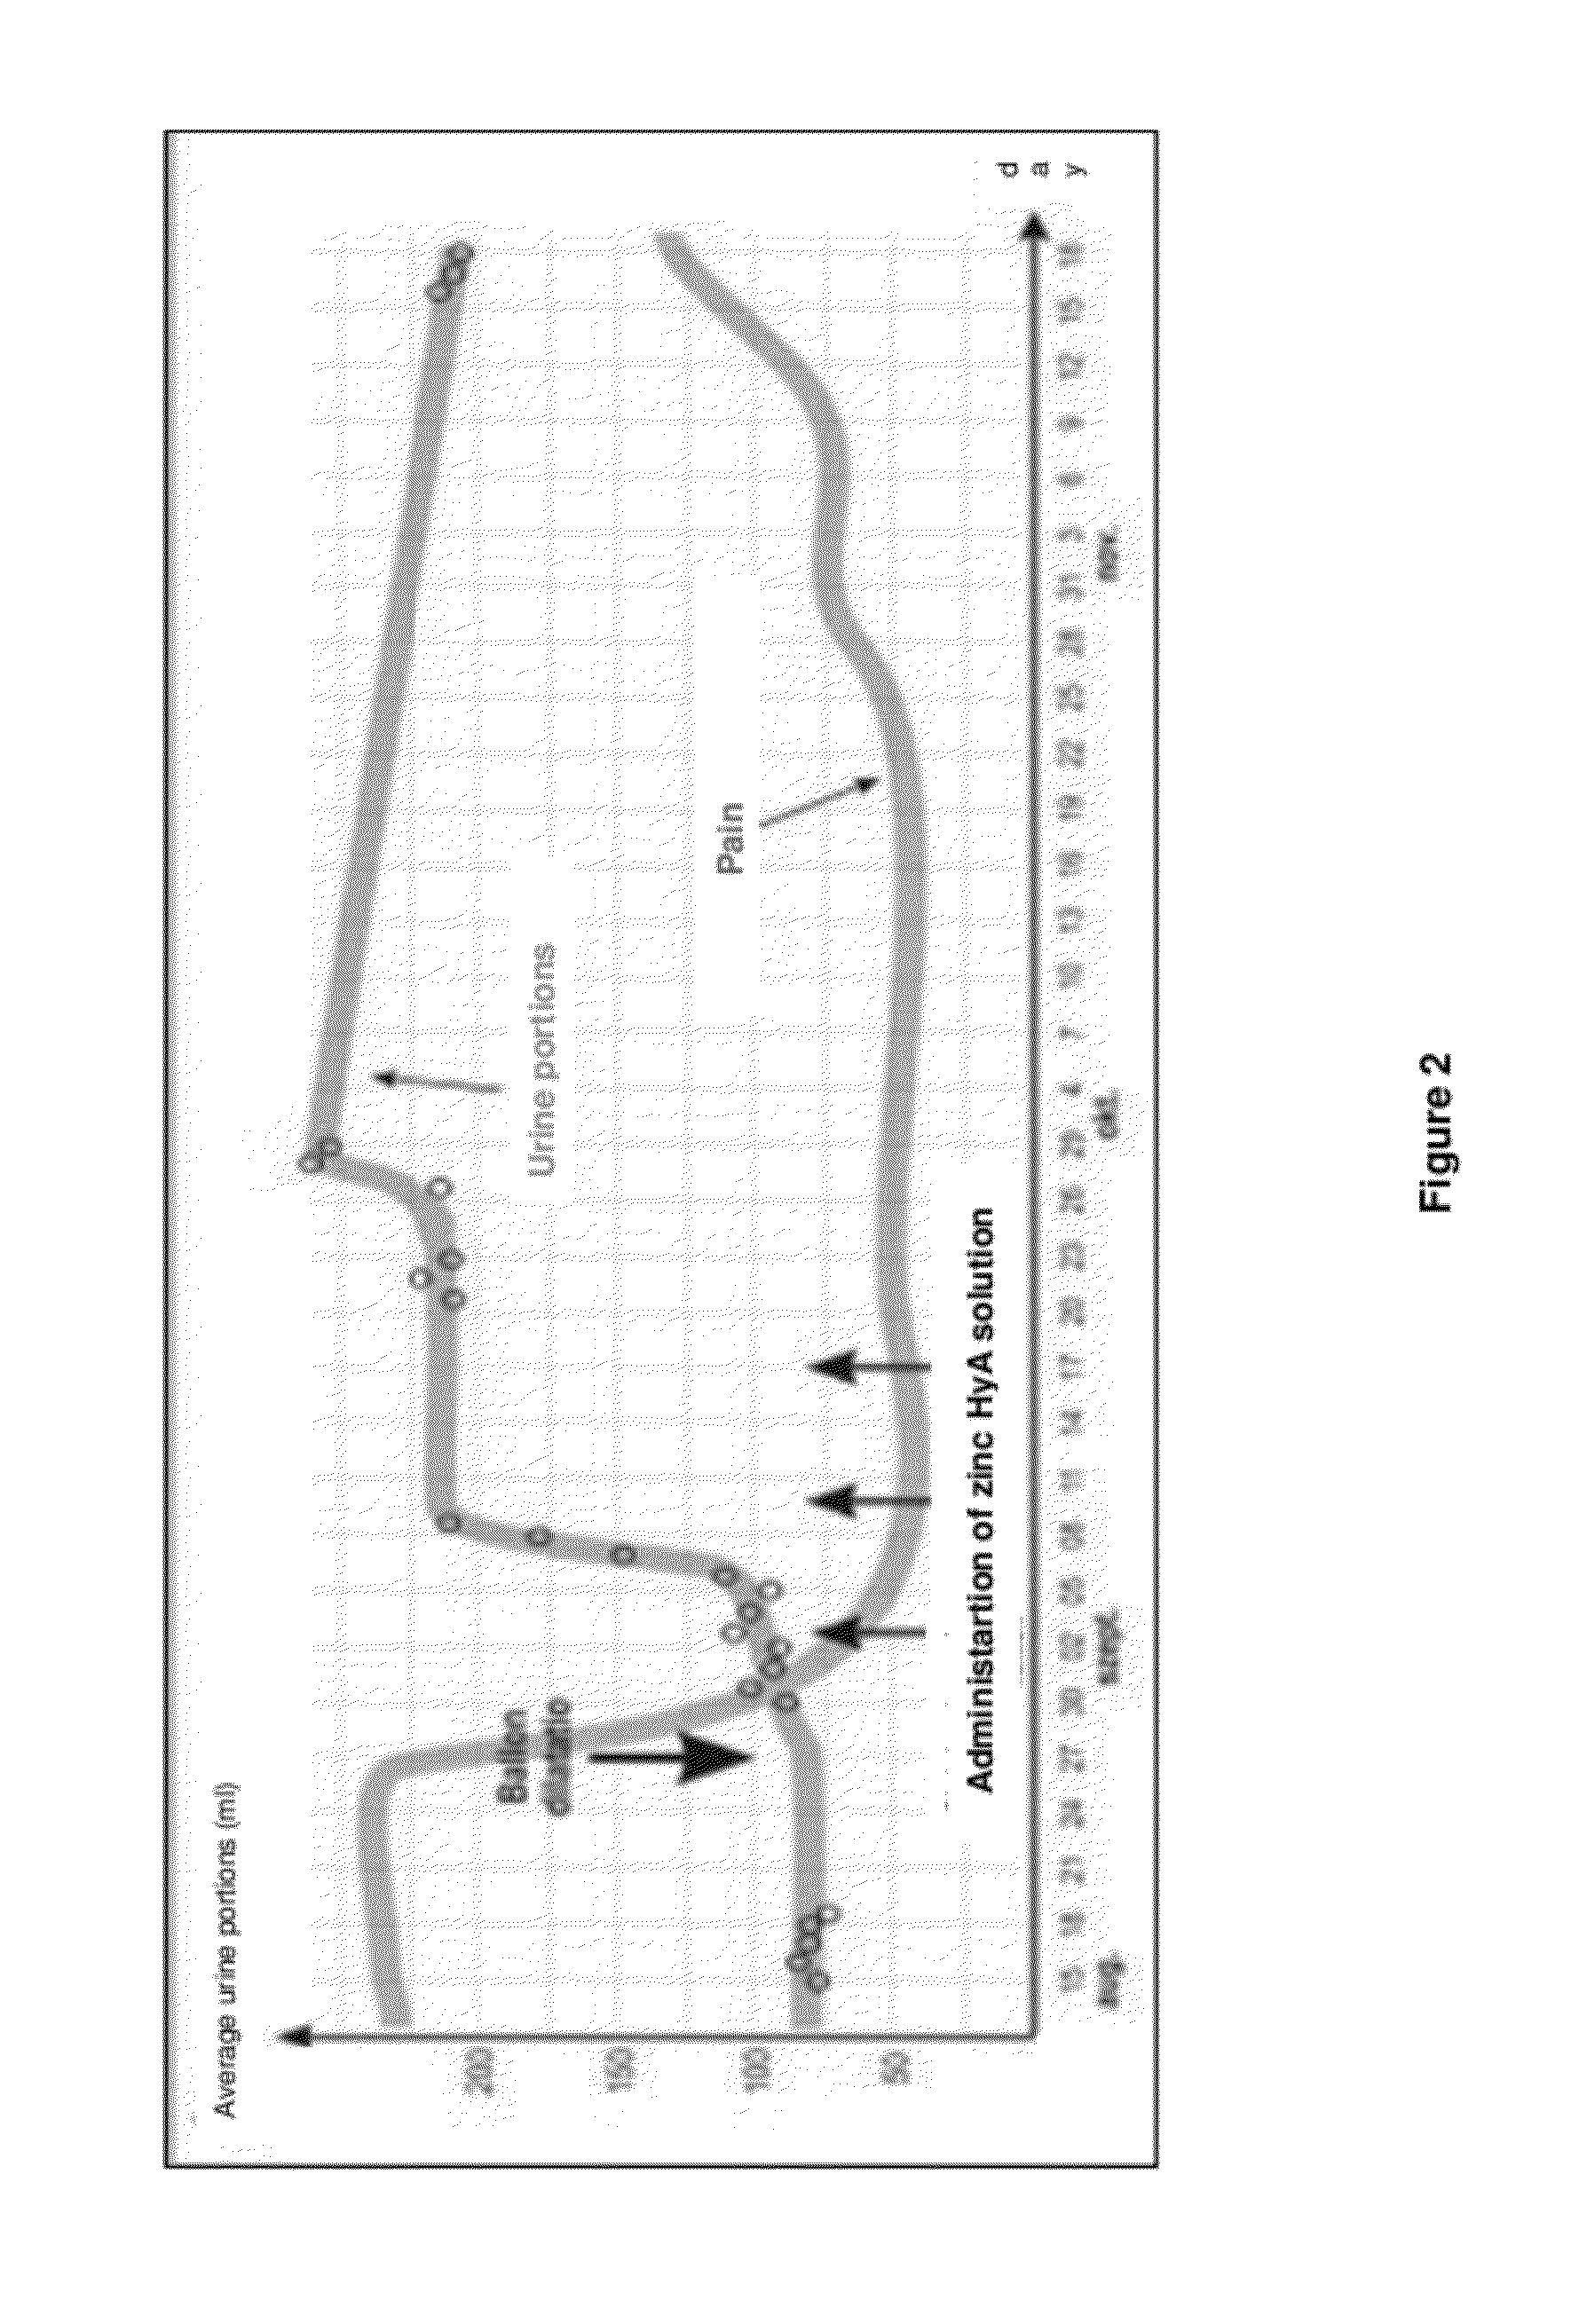 Pharmaceutical composition for the treatment of bladder disorders